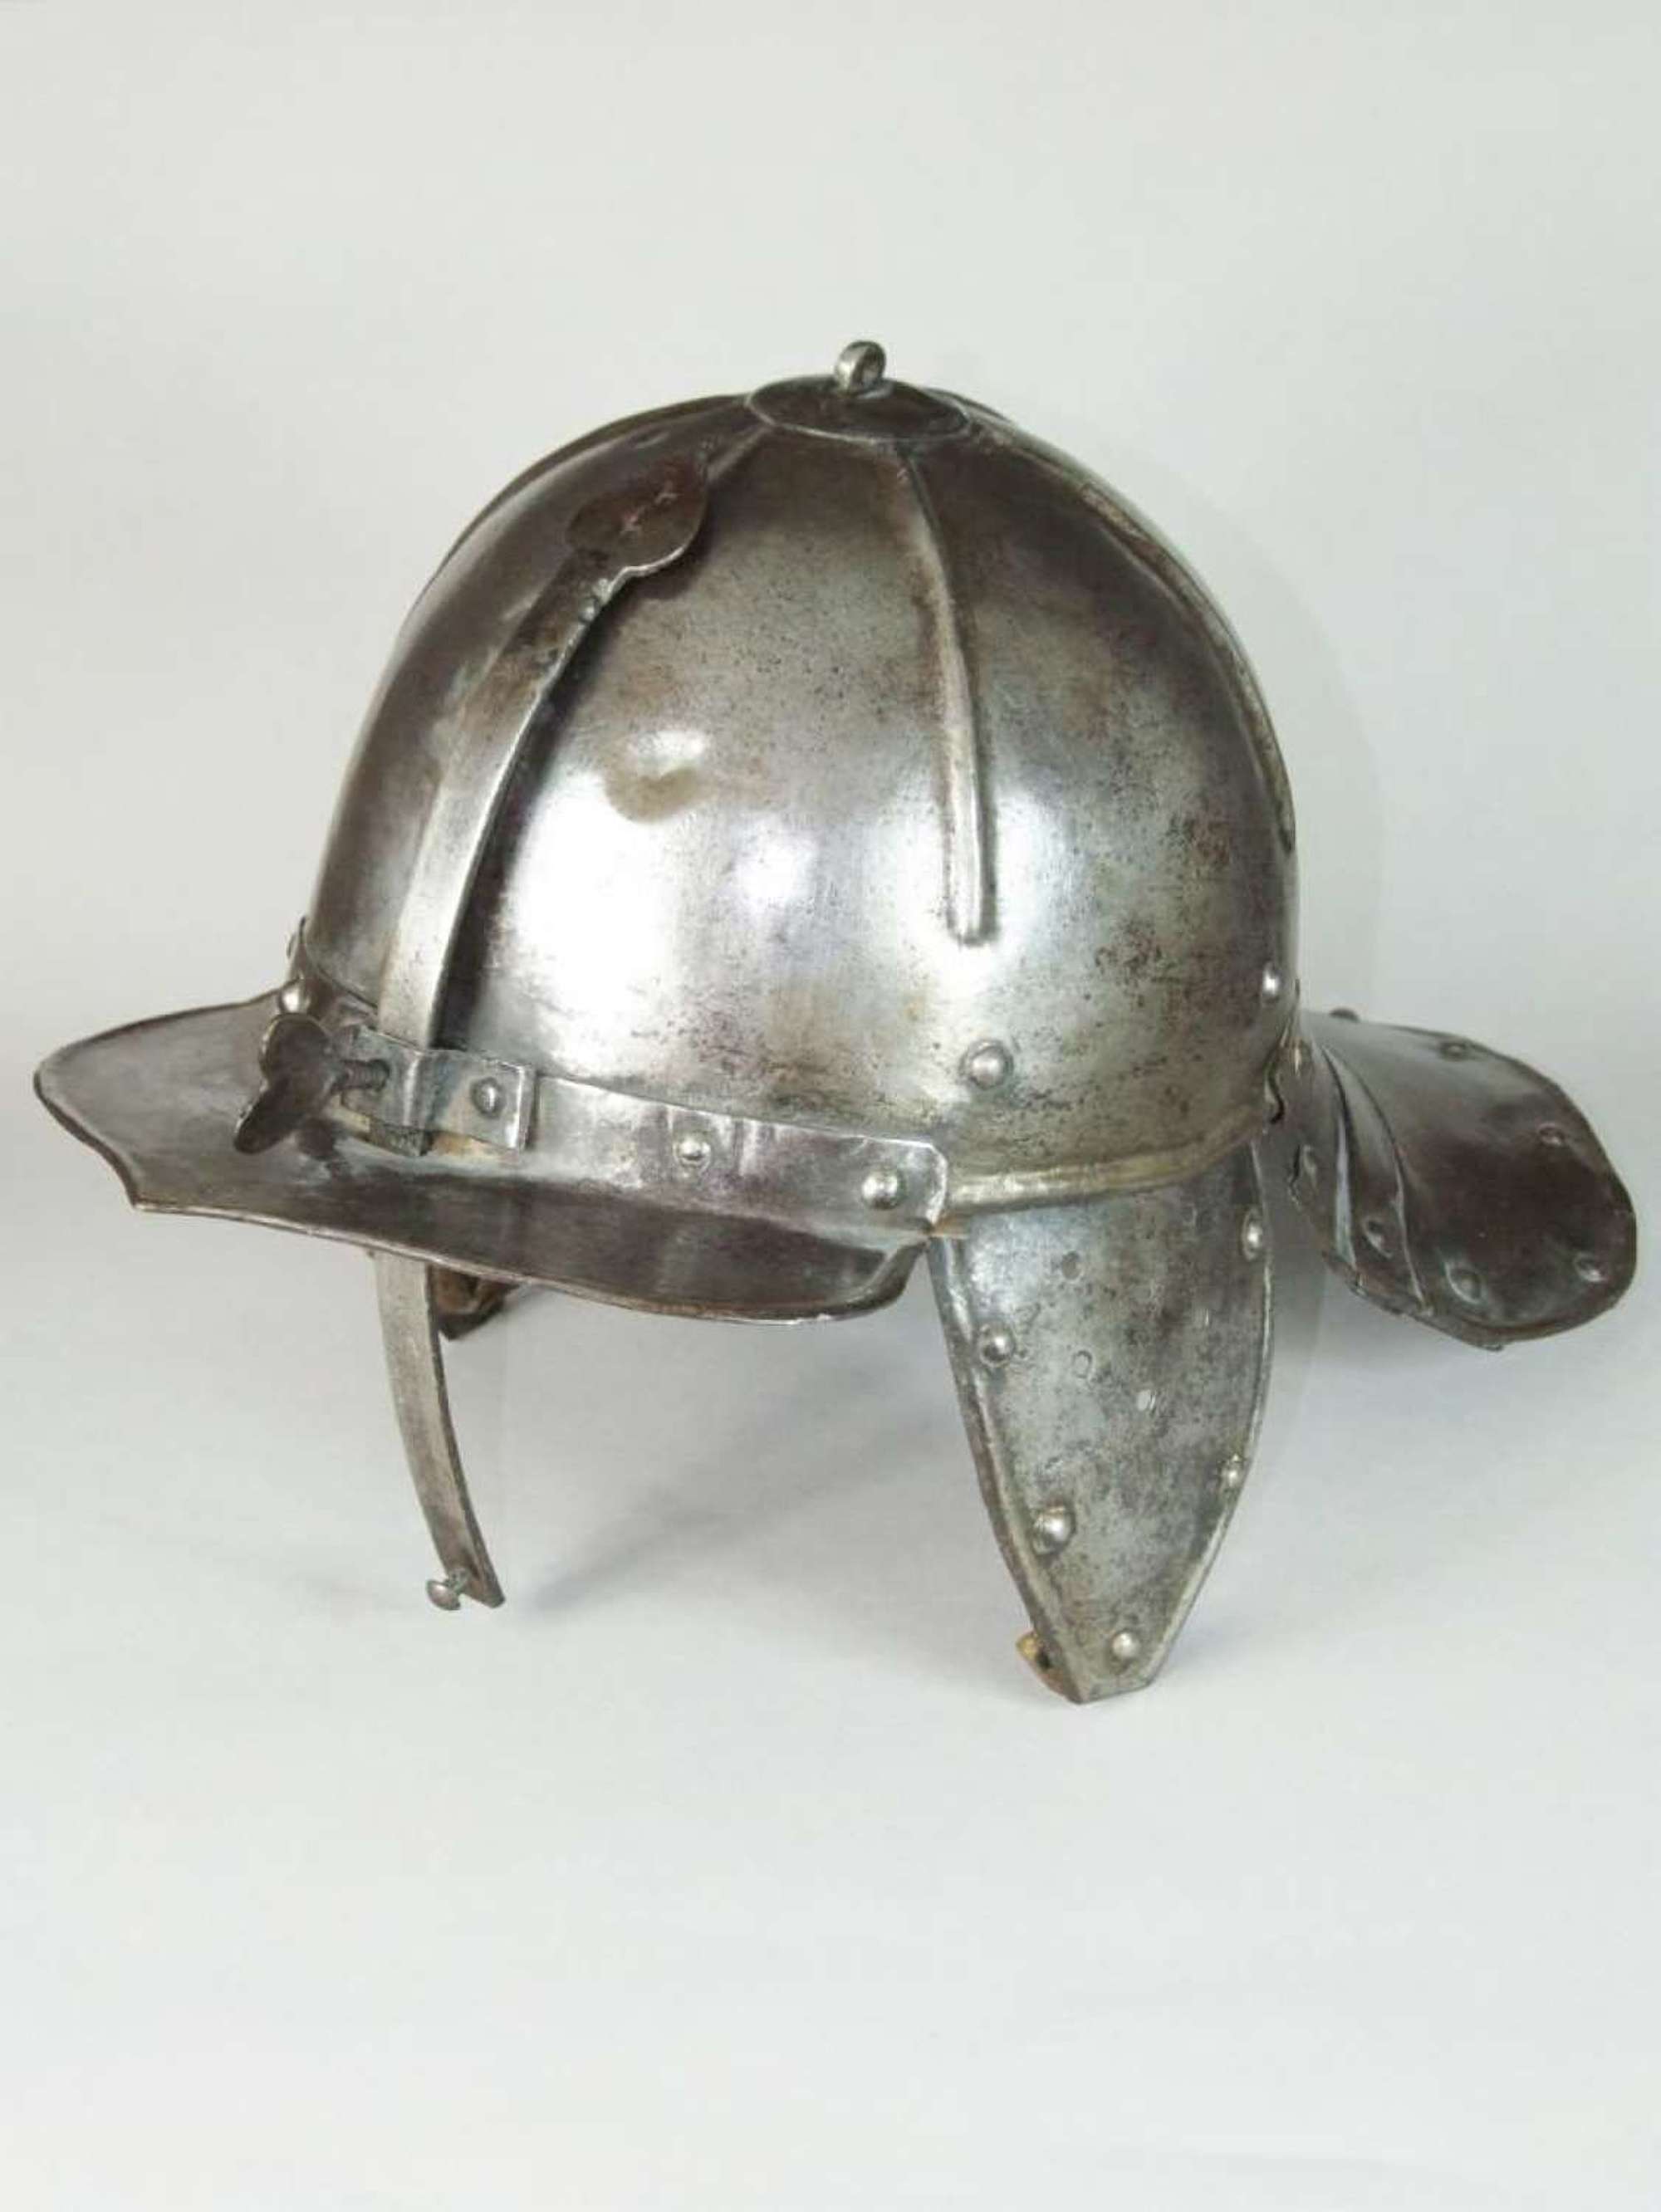 ZischÃ¤gge or Lobster Tail Helmet Dating from about 1650.